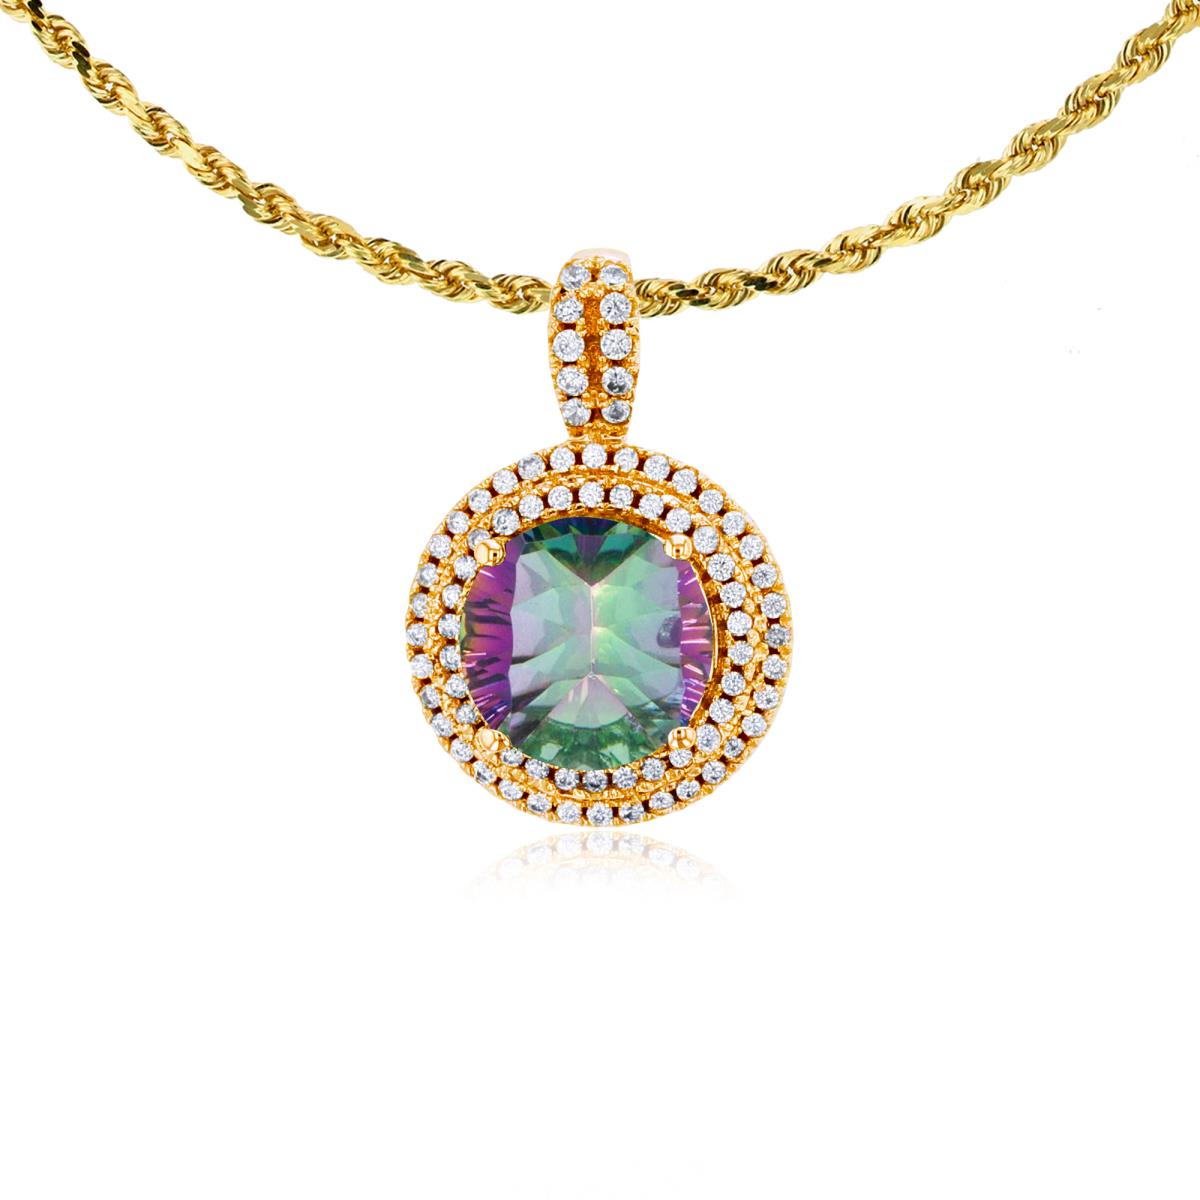 14K Yellow Gold 7mm Round Mystic Green Quartz & 0.25 CTTW Diamonds Double Halo 18" Rope Chain Necklace